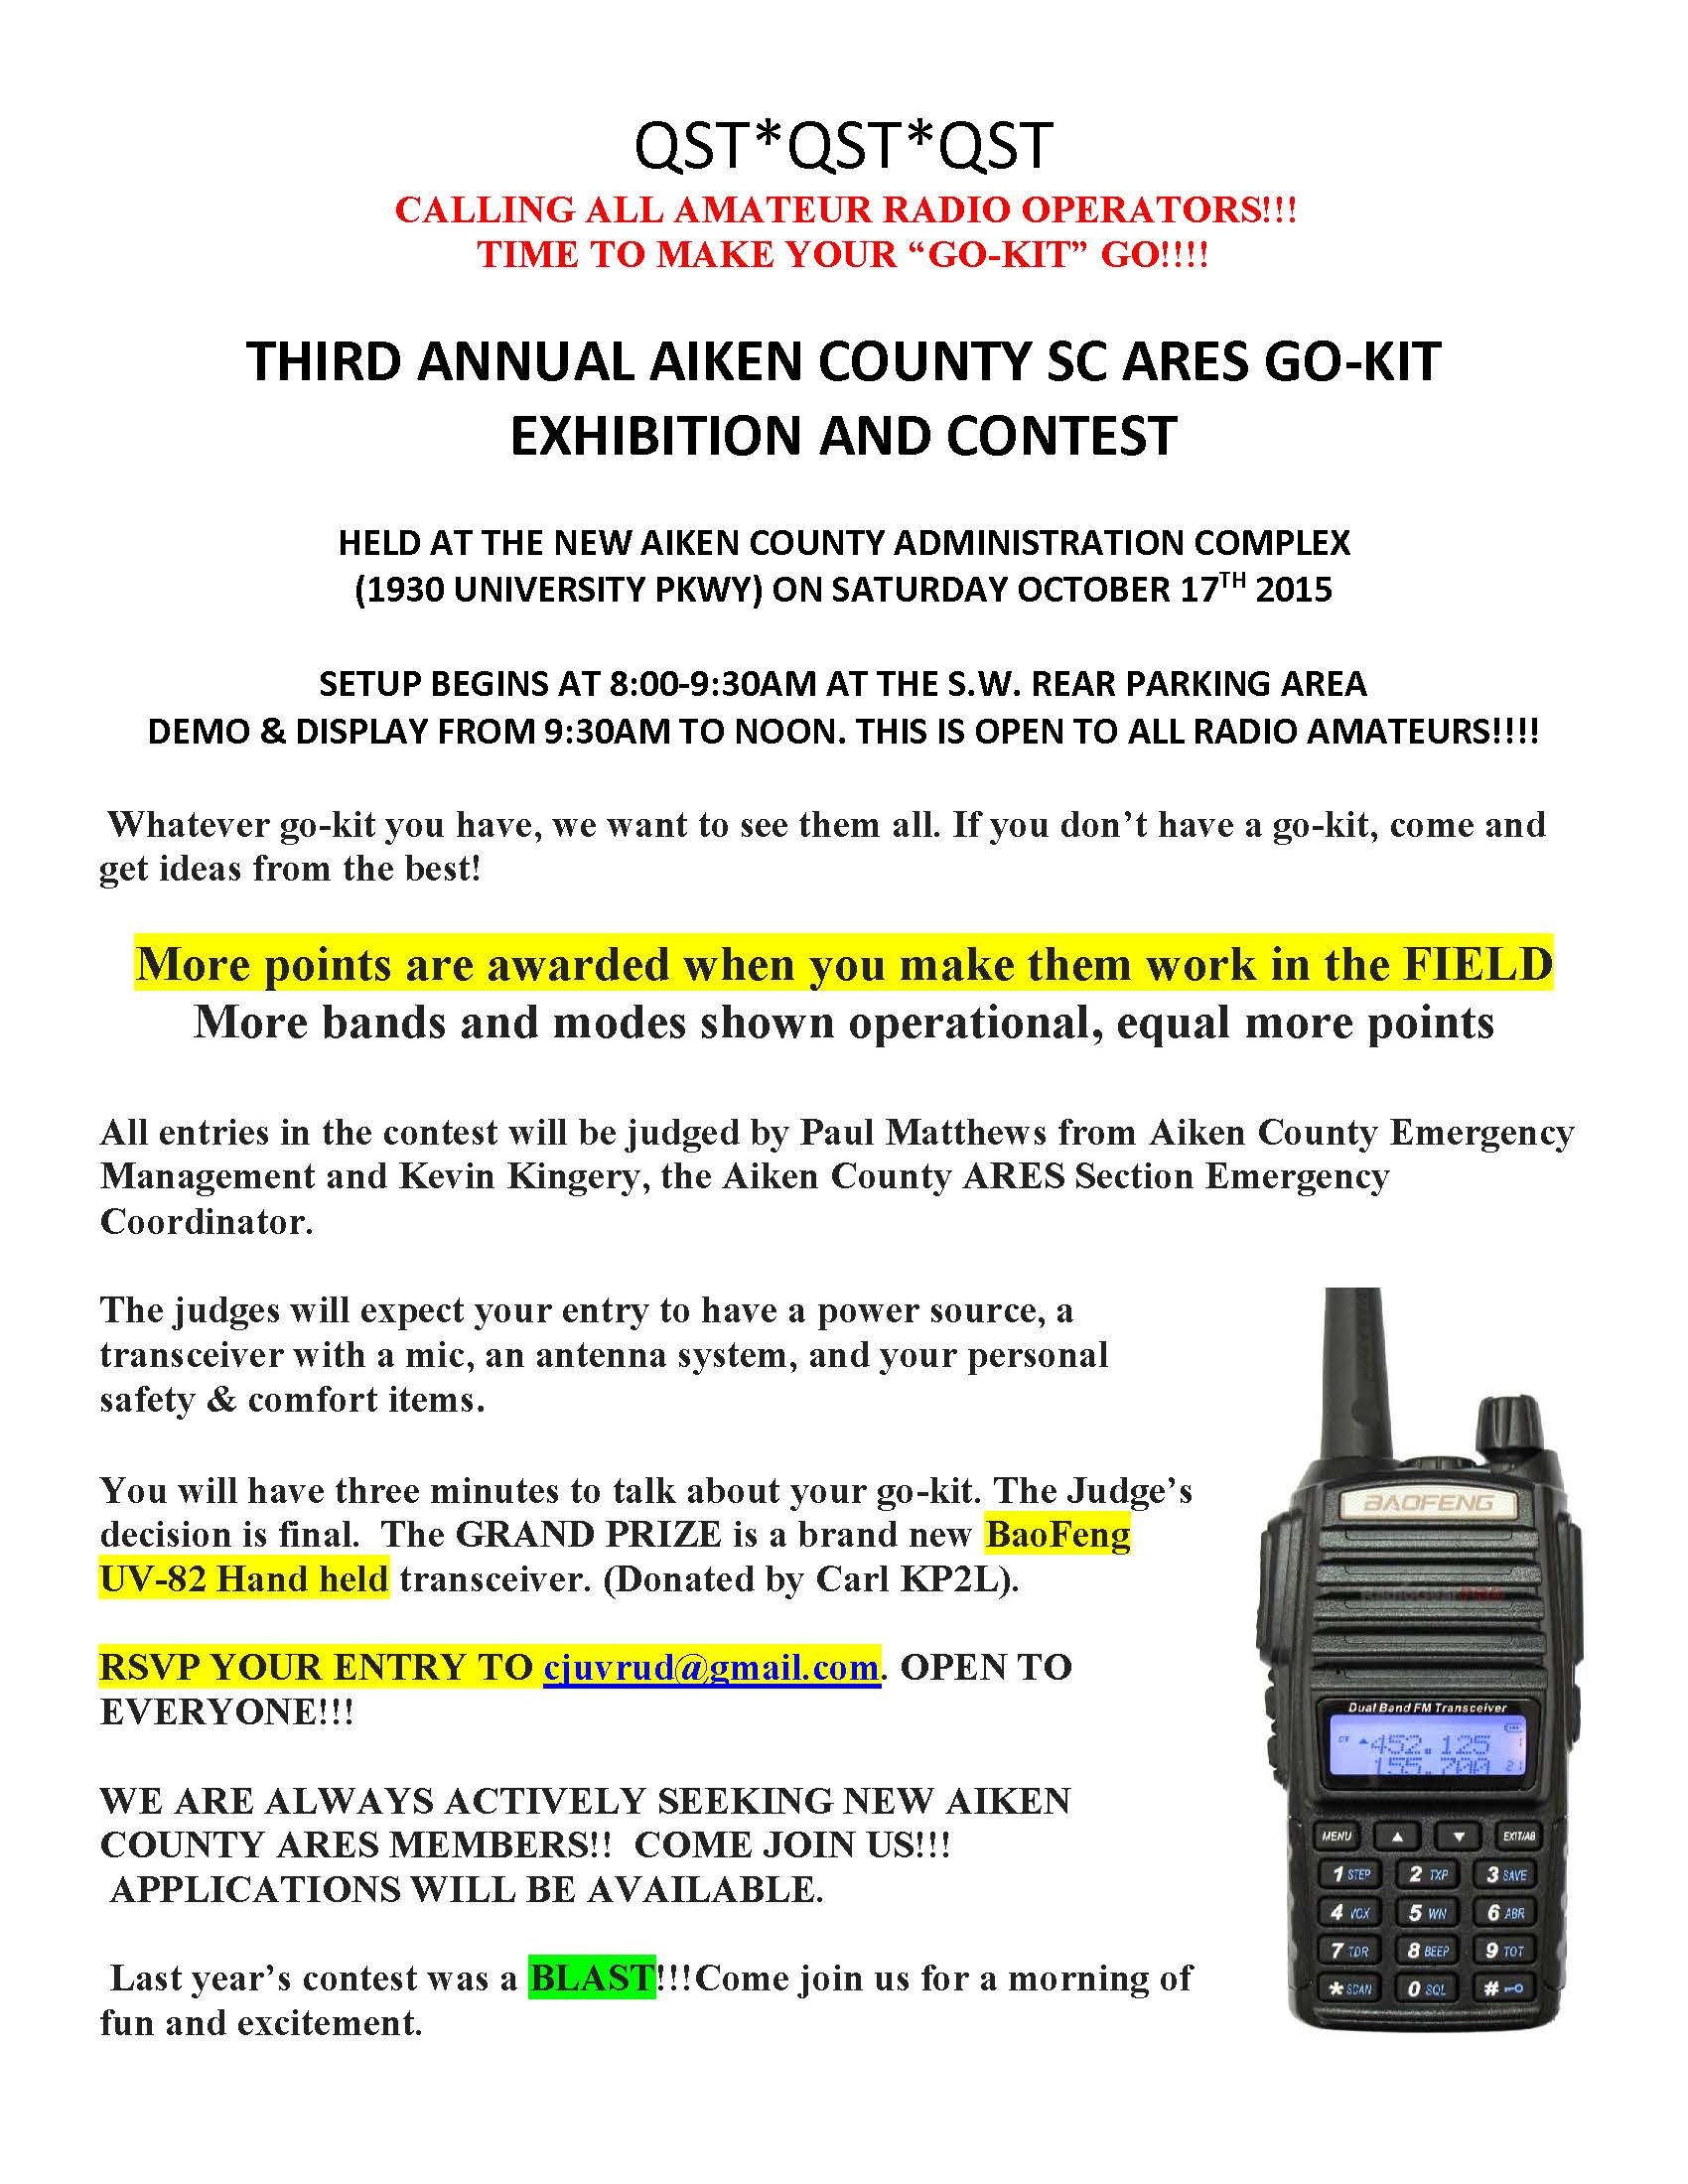 Third Annual Aiken County, SC ARES Go-Kit Exhibition and Contest 10-17-2015